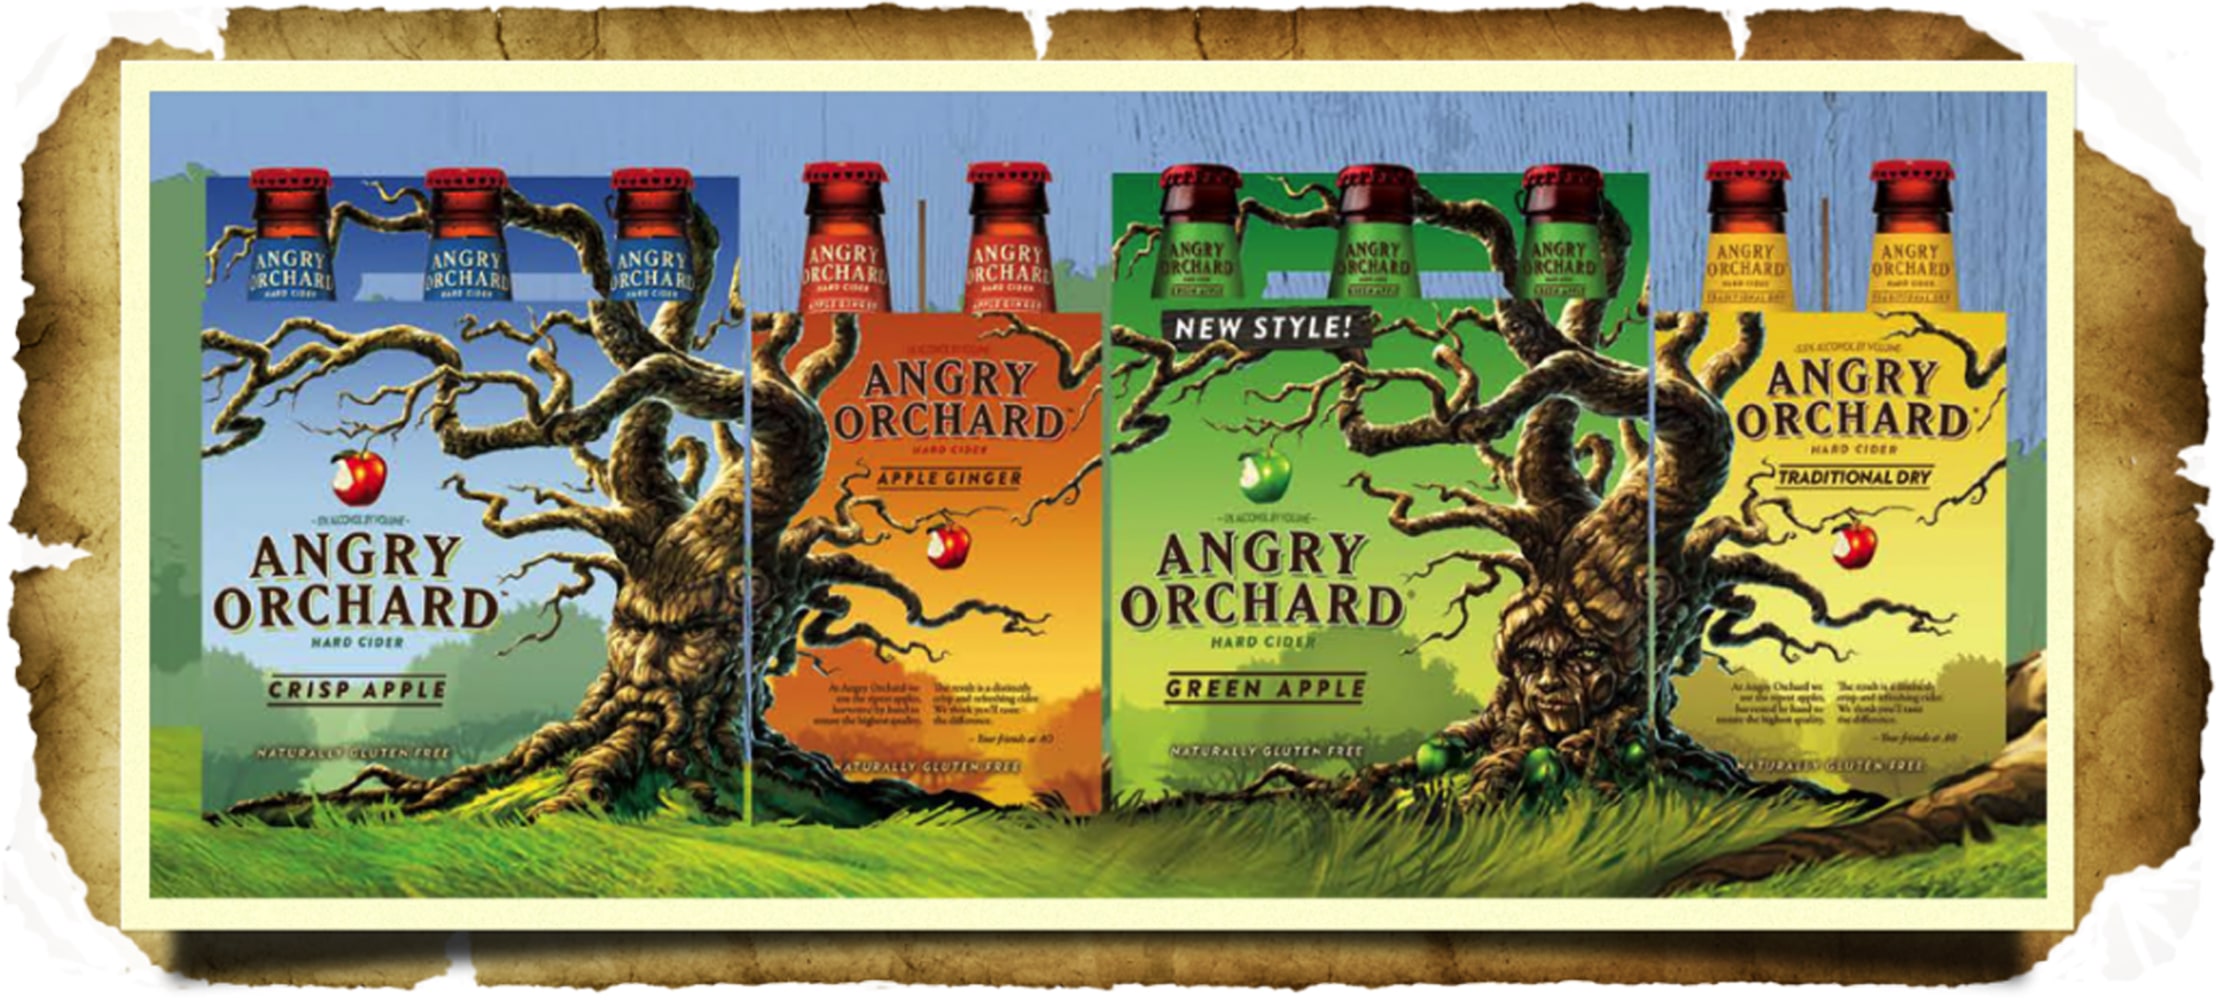 Angry Orchard Recalls Hard Cider Over Potential Bottle Explosion NBC News